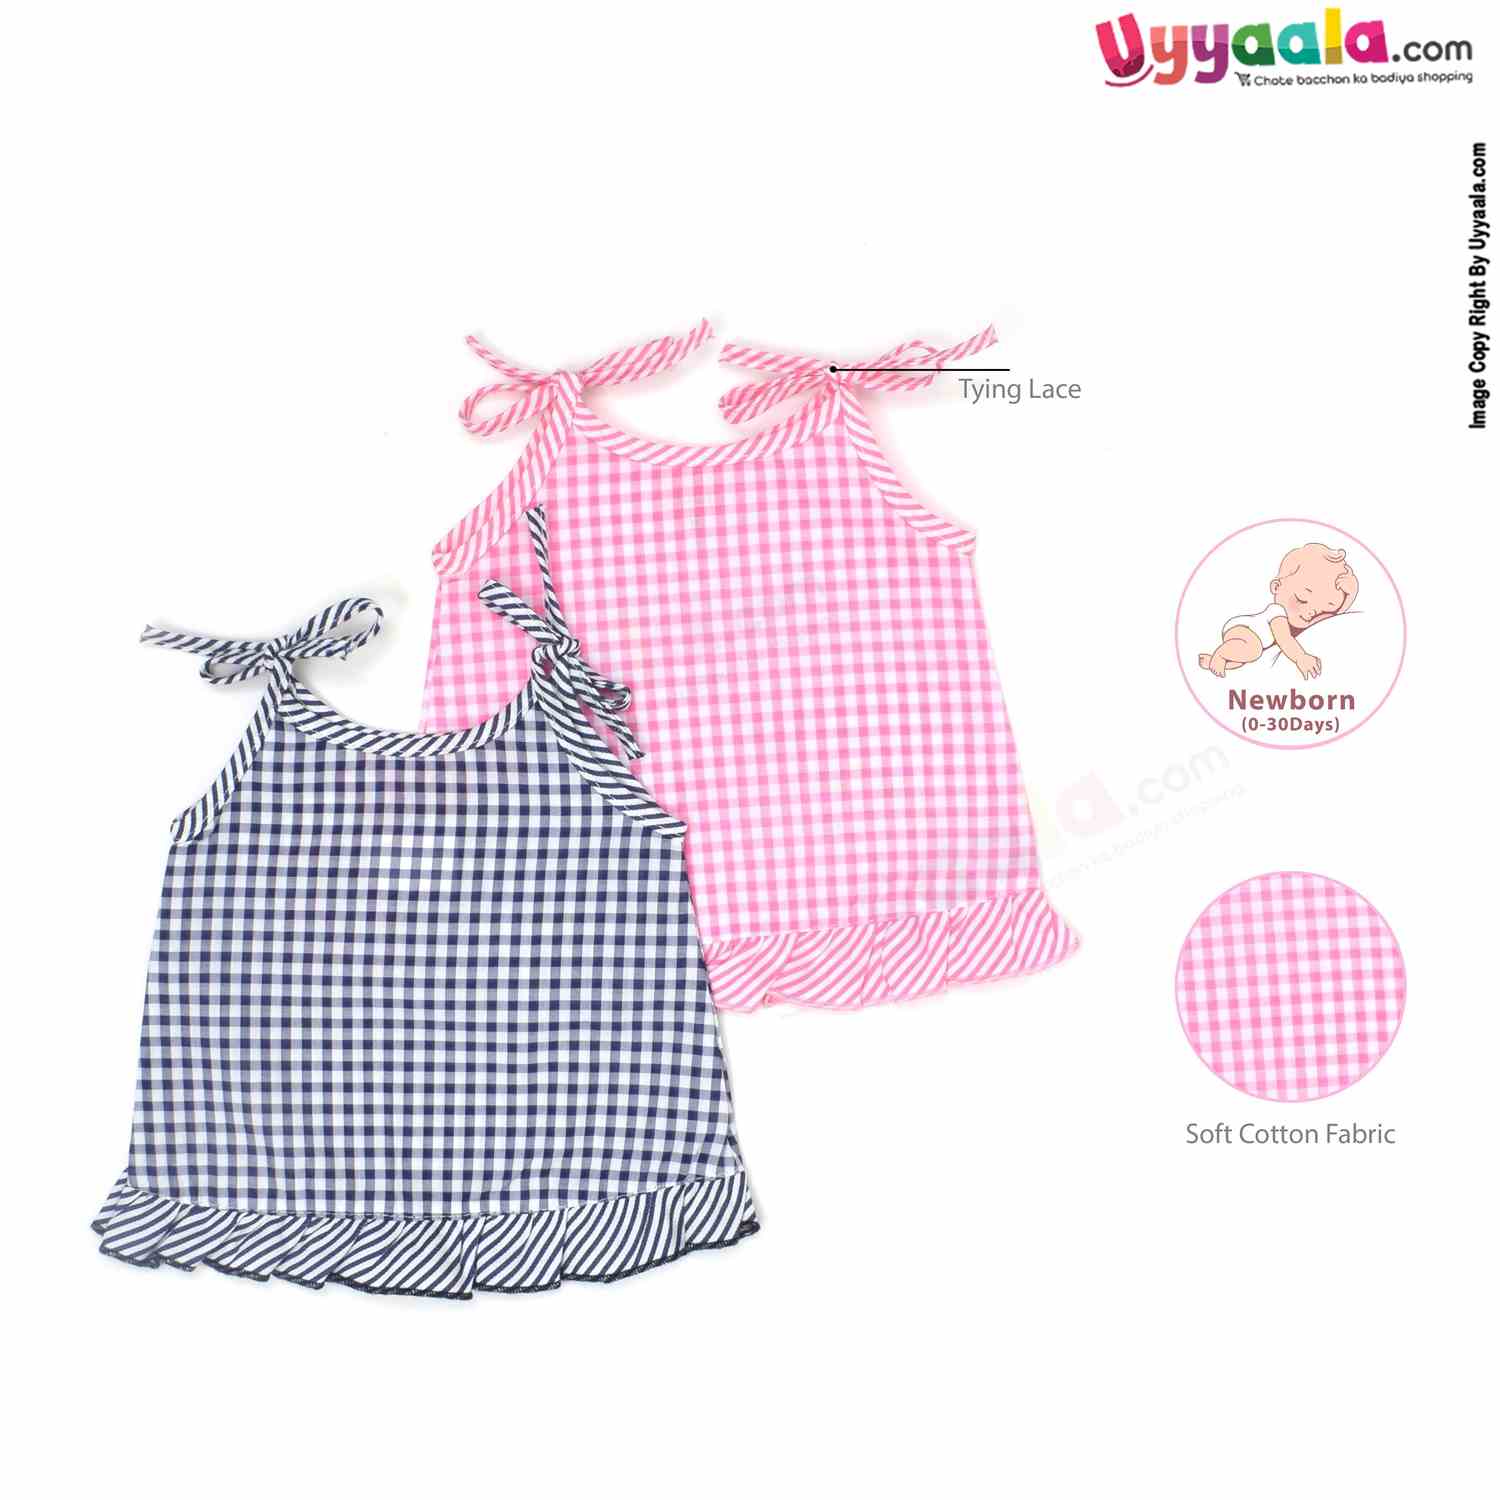 VOCAL BABY Sleeveless Newborn Baby Frock, Top Opening Tie Knot Lace Model, Premium Quality Cotton Baby Wear, Checks Print, Pink & Black - 2 Pack